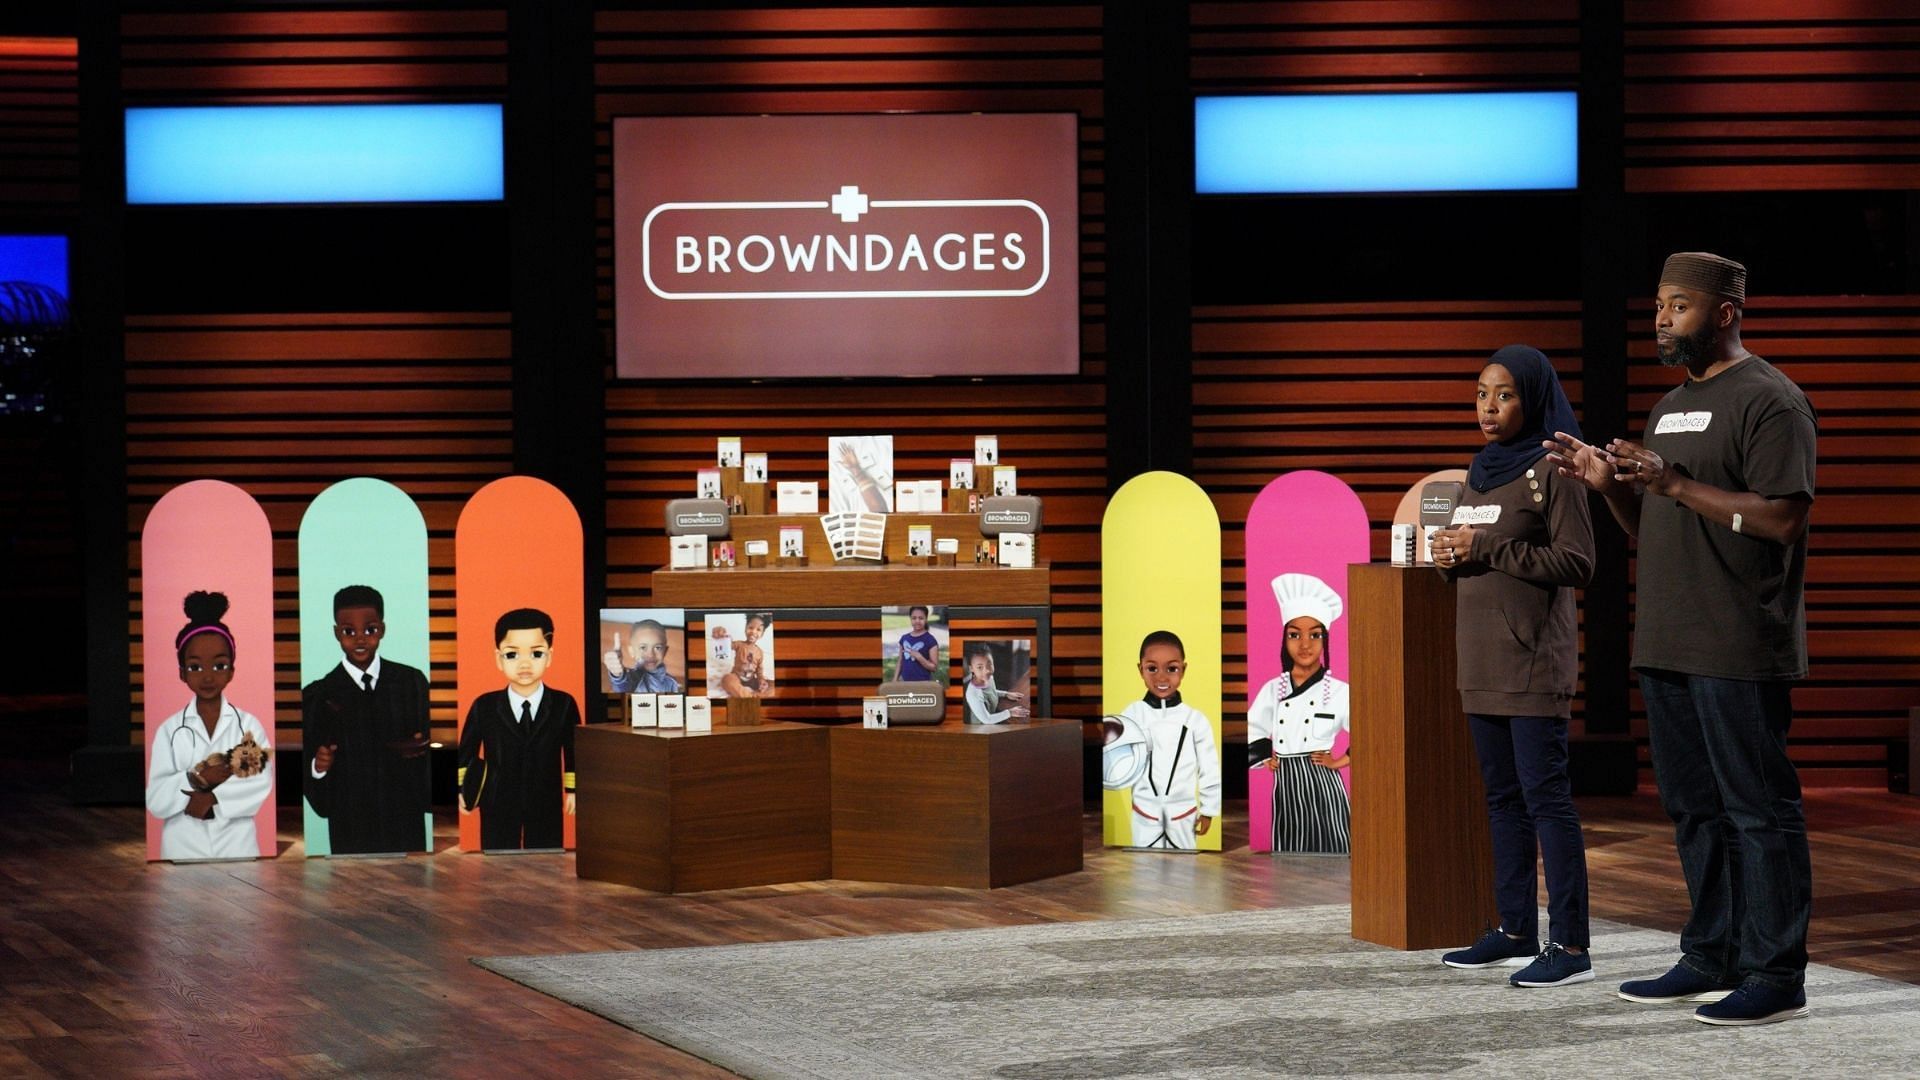 Browndages pitch their product on Shark Tank episode 20 (Image via Christopher Willard/ABC)